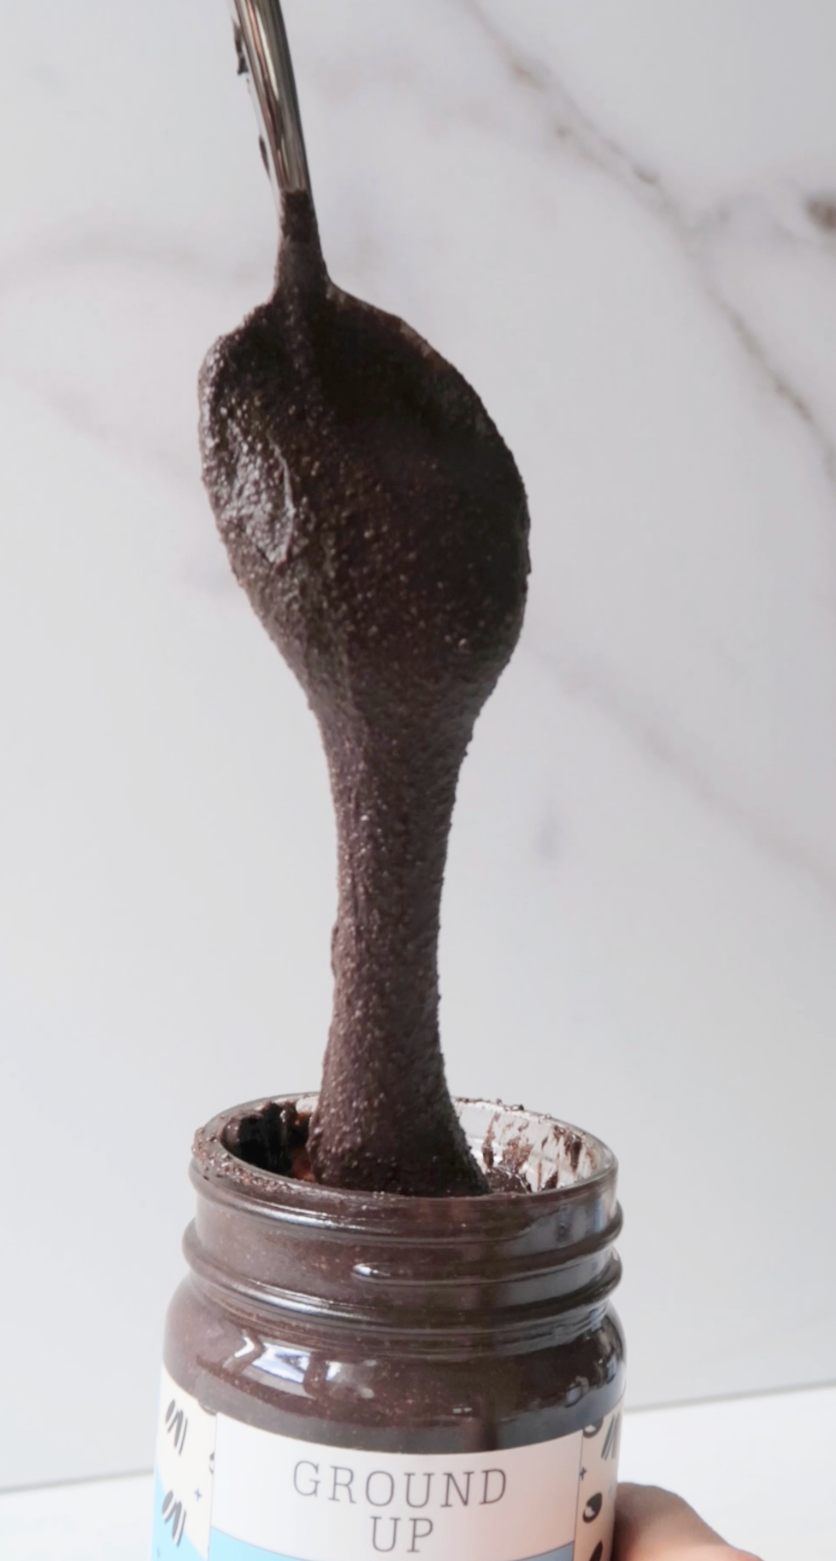 Dark Cocoa Cookie being scooped with a spoon